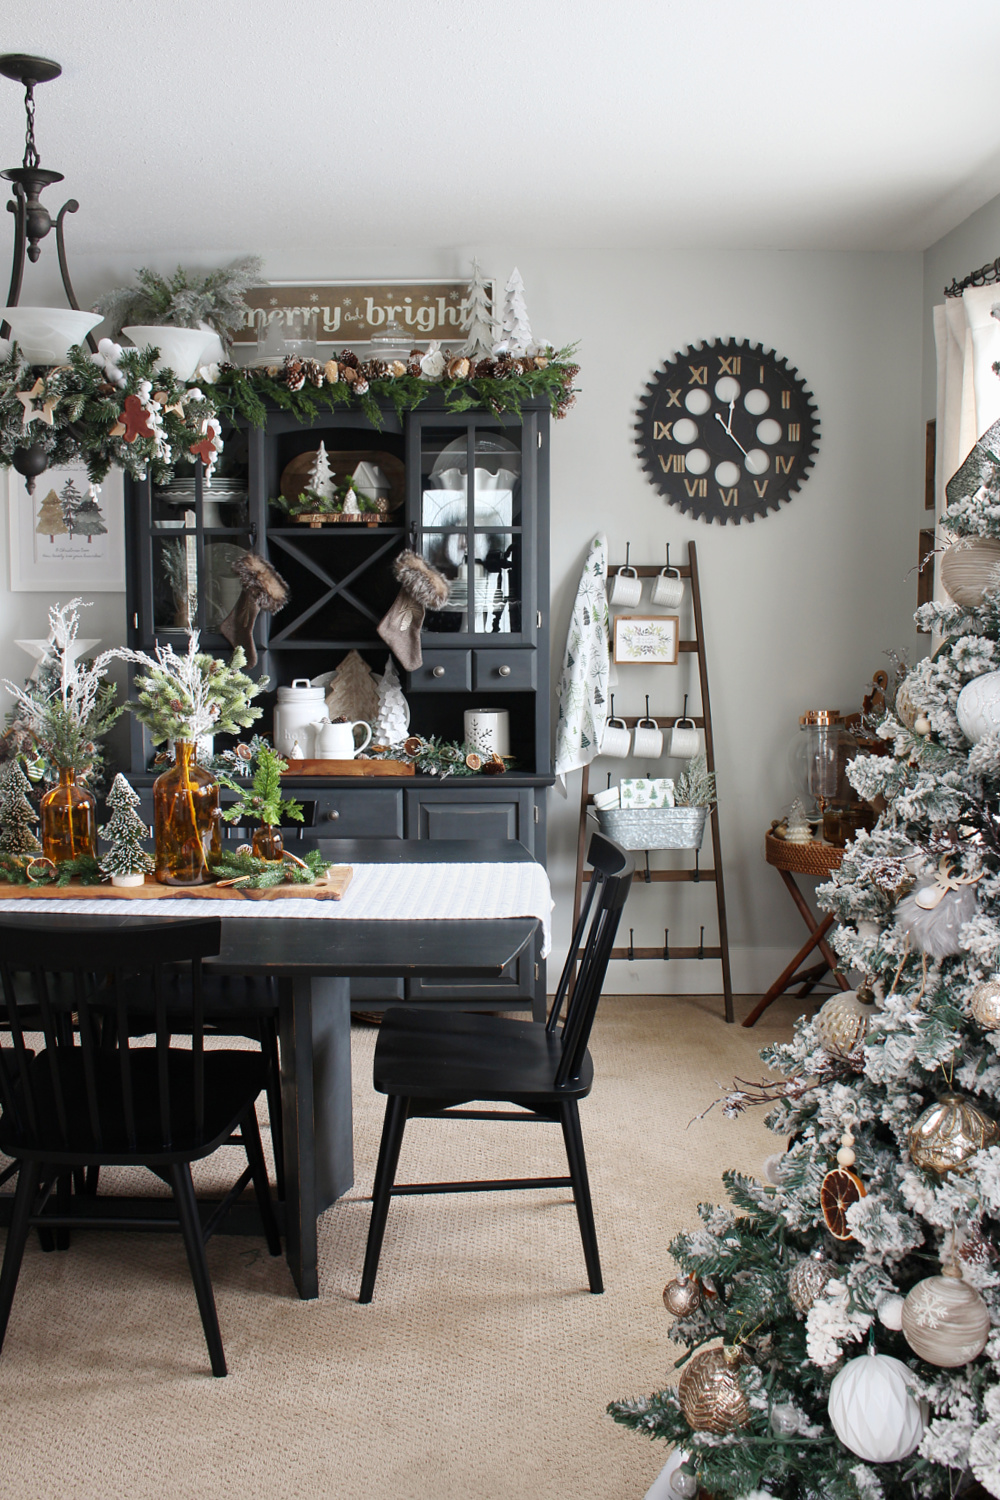 Christmas dining room decorated with greens, amber and metallics.